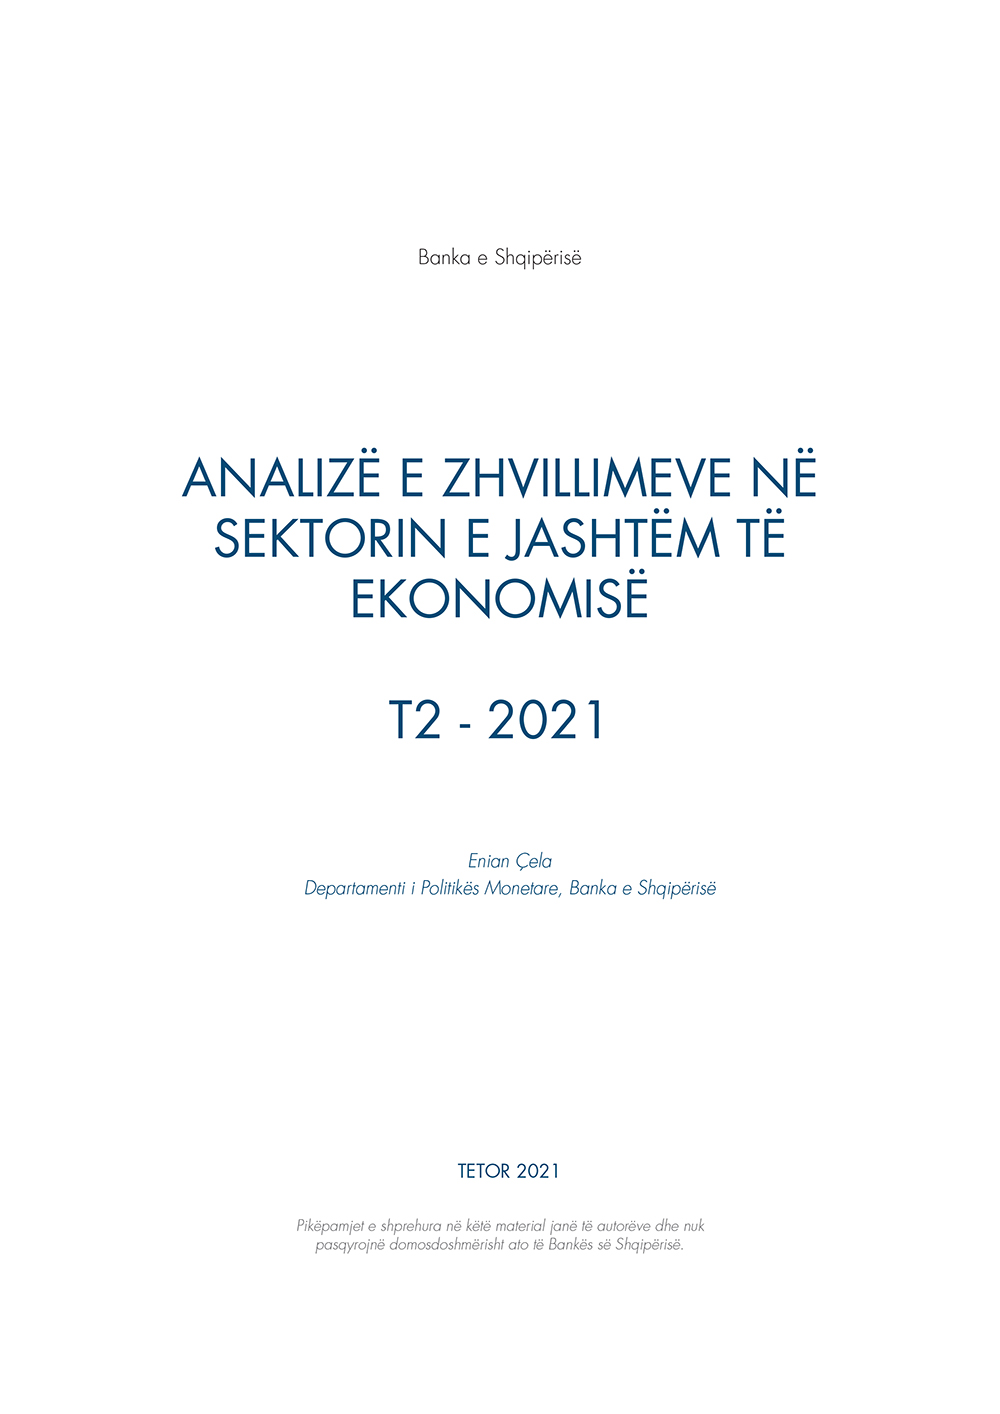 Analysis of developments in the external sector of the economy 2021 Q2